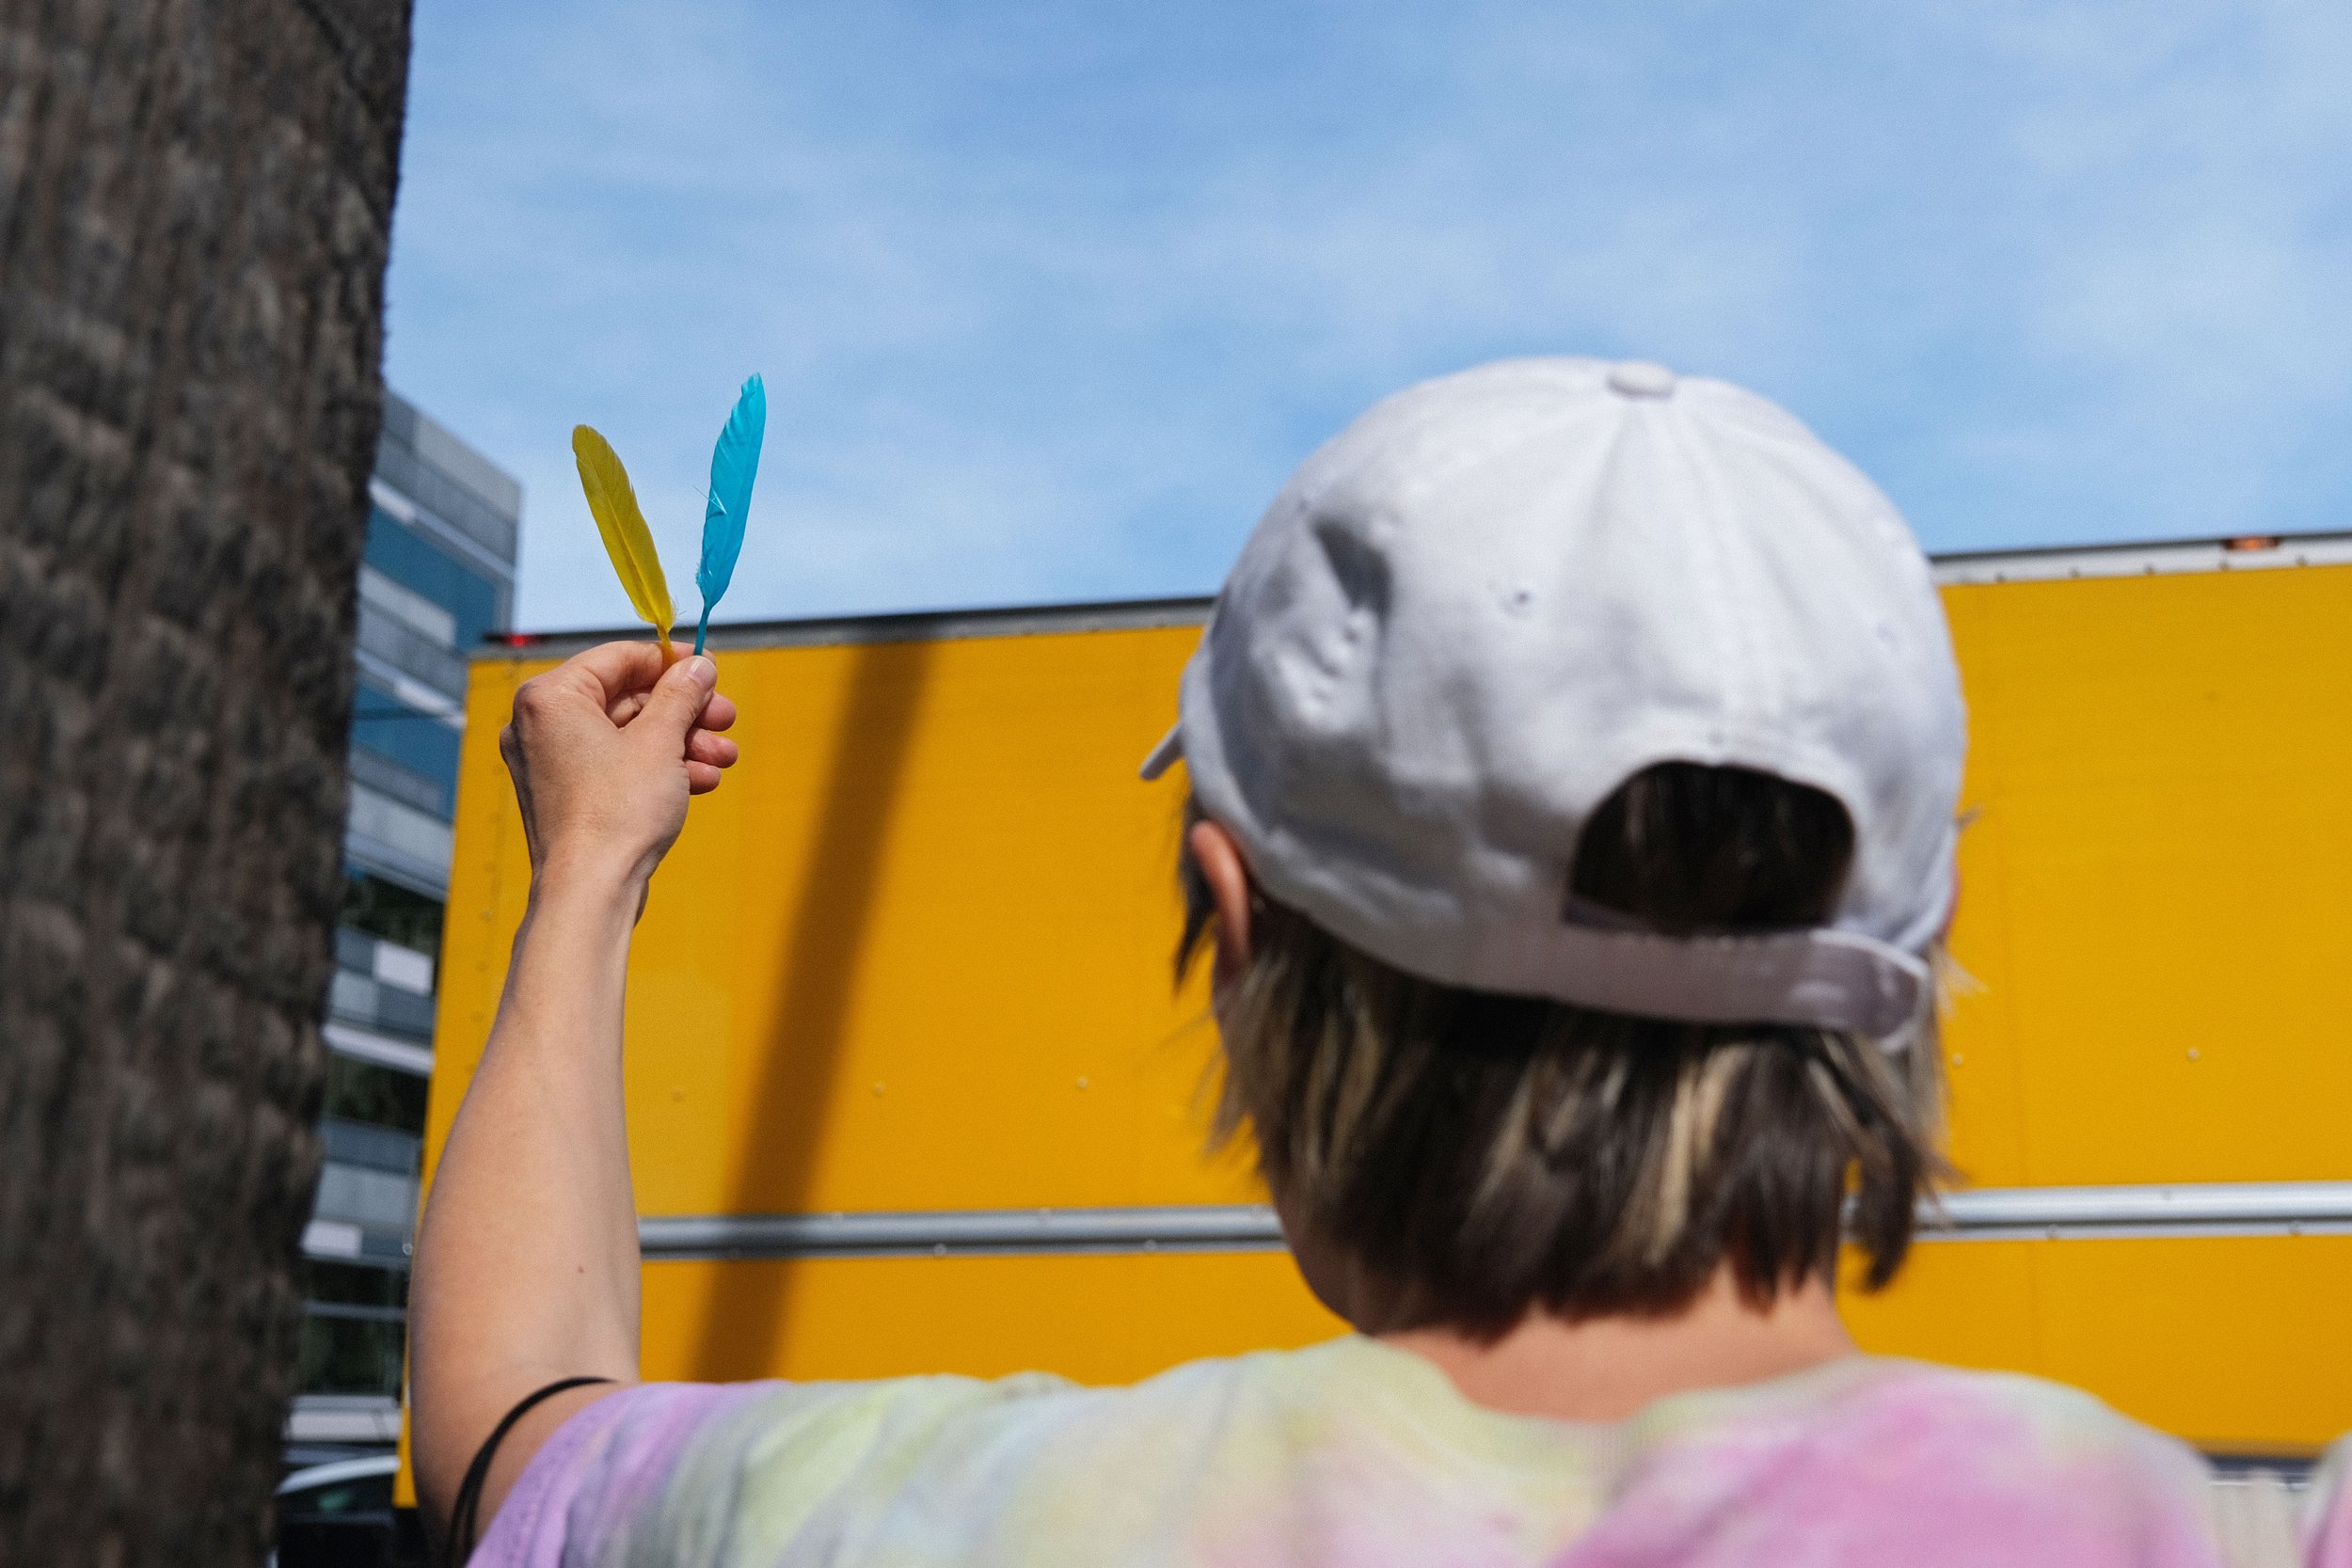  Above, Liisa Jokinen holds up two feathers in Los Angeles on Feb. 26. Visiting Los Angeles from Finland, she found these feathers while looking for blue and yellow things she could use to show her support for Ukraine. She fears that if Russia is suc